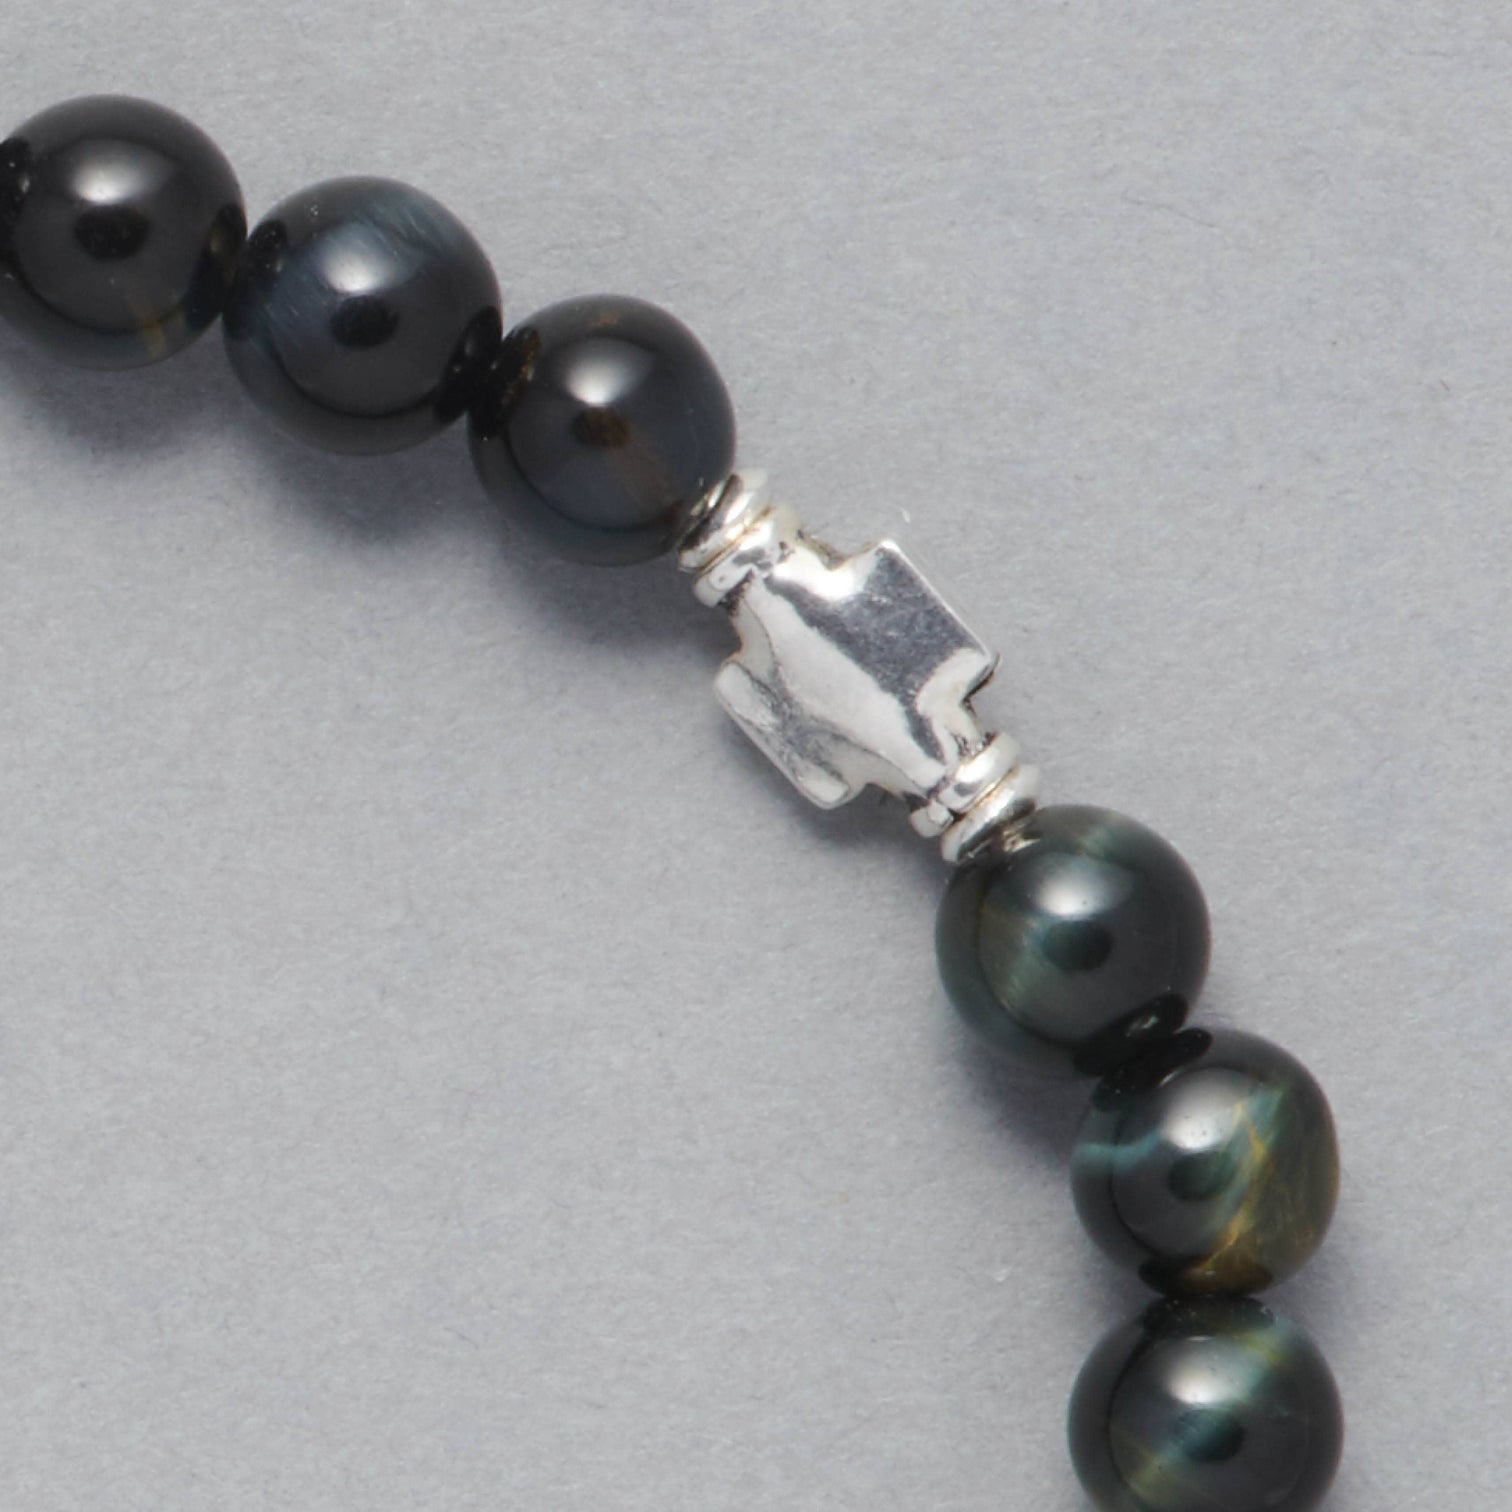 Detail shot of the Liam Men Beaded Bracelet made with Falcon Eye and Sterling Silver Element. 